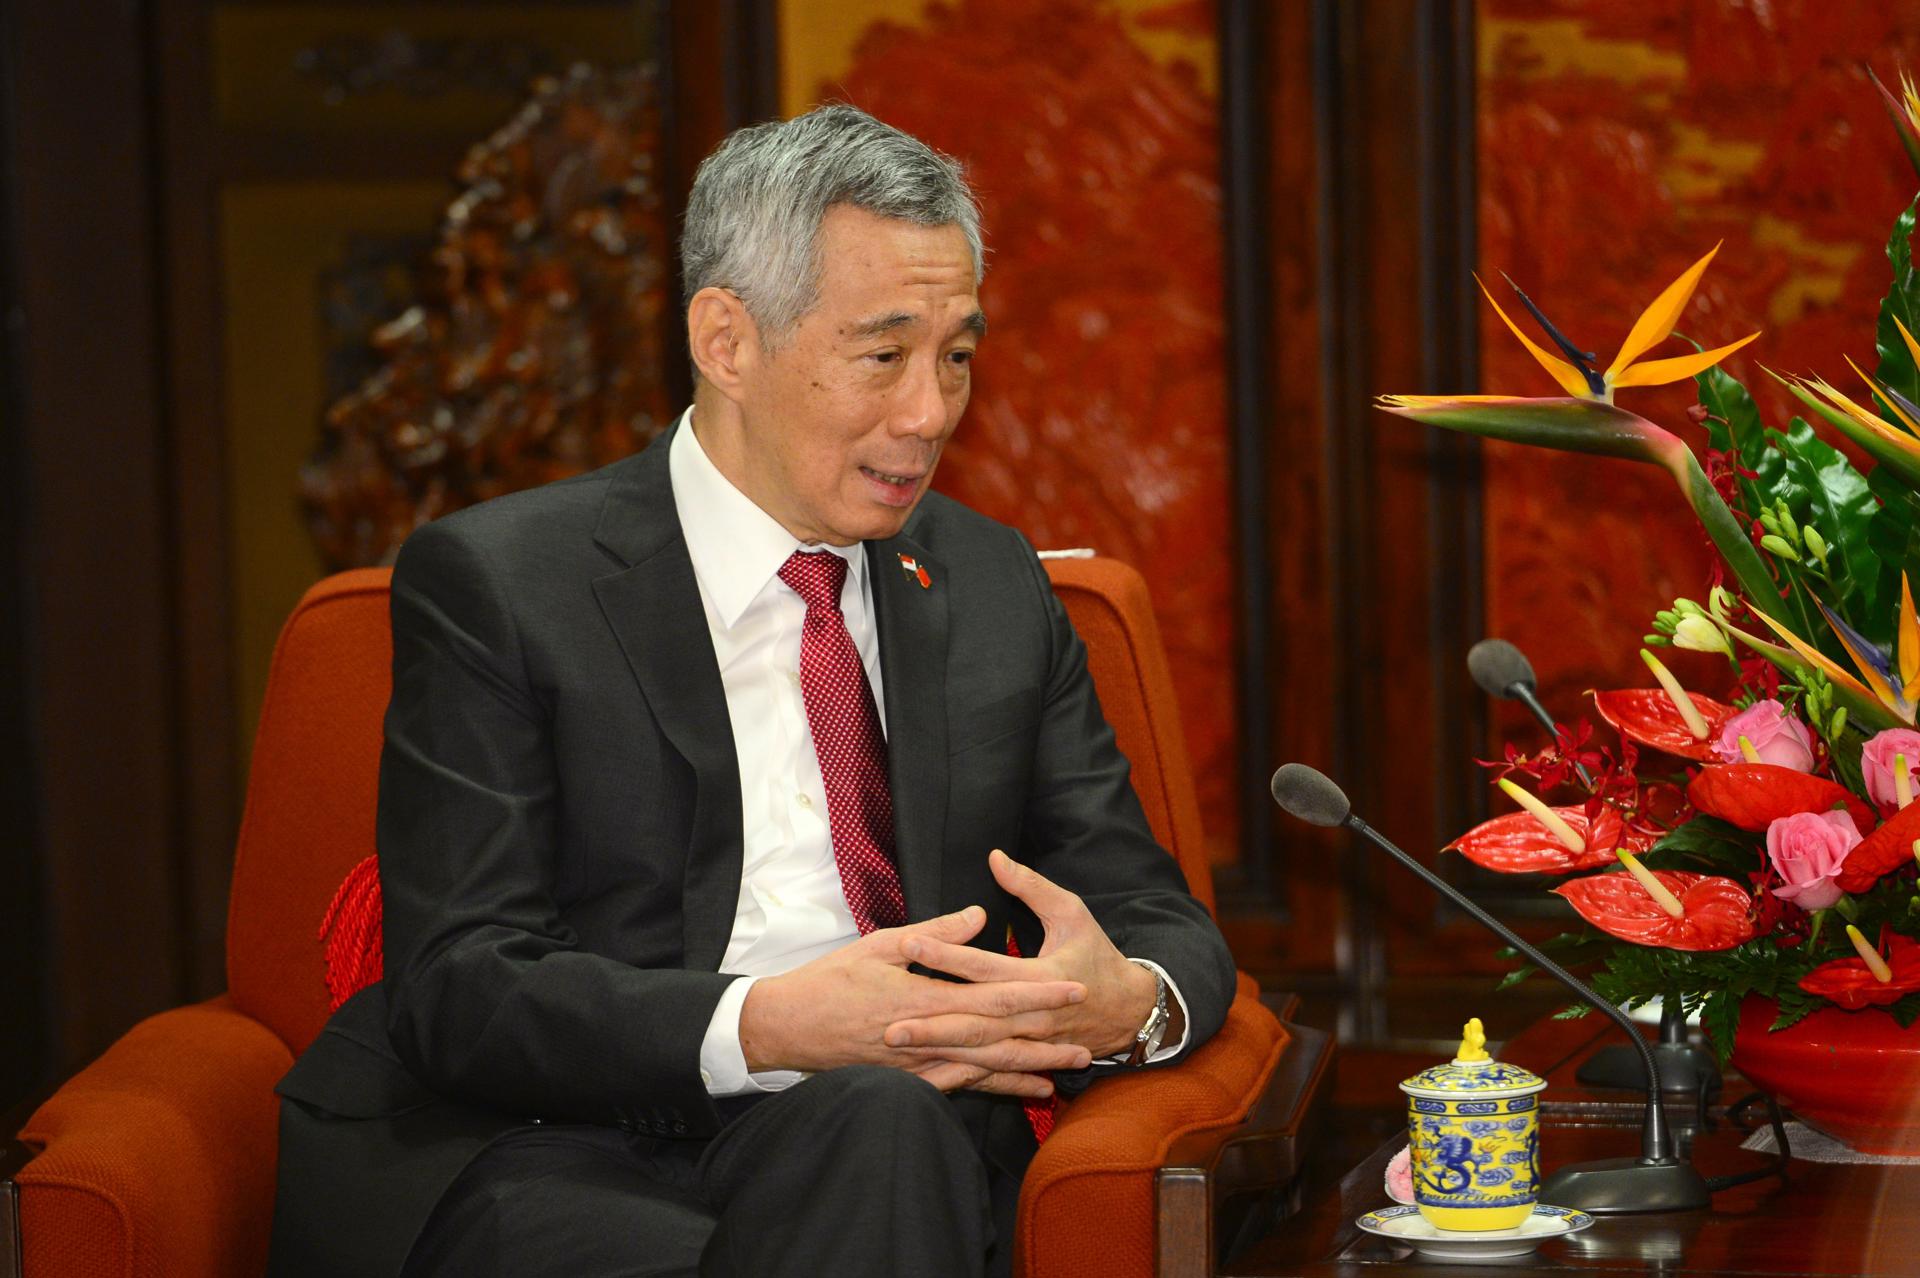 Singapore's Prime Minister Lee Hsien Loong speaks with Chinese Vice President Wang Qishan (not pictured) during a meeting at the Zhongnanhai Leadership Compound in Beijing, China, 09 April 2018. EFE-EPA/PARKER SONG / POOL/FILE